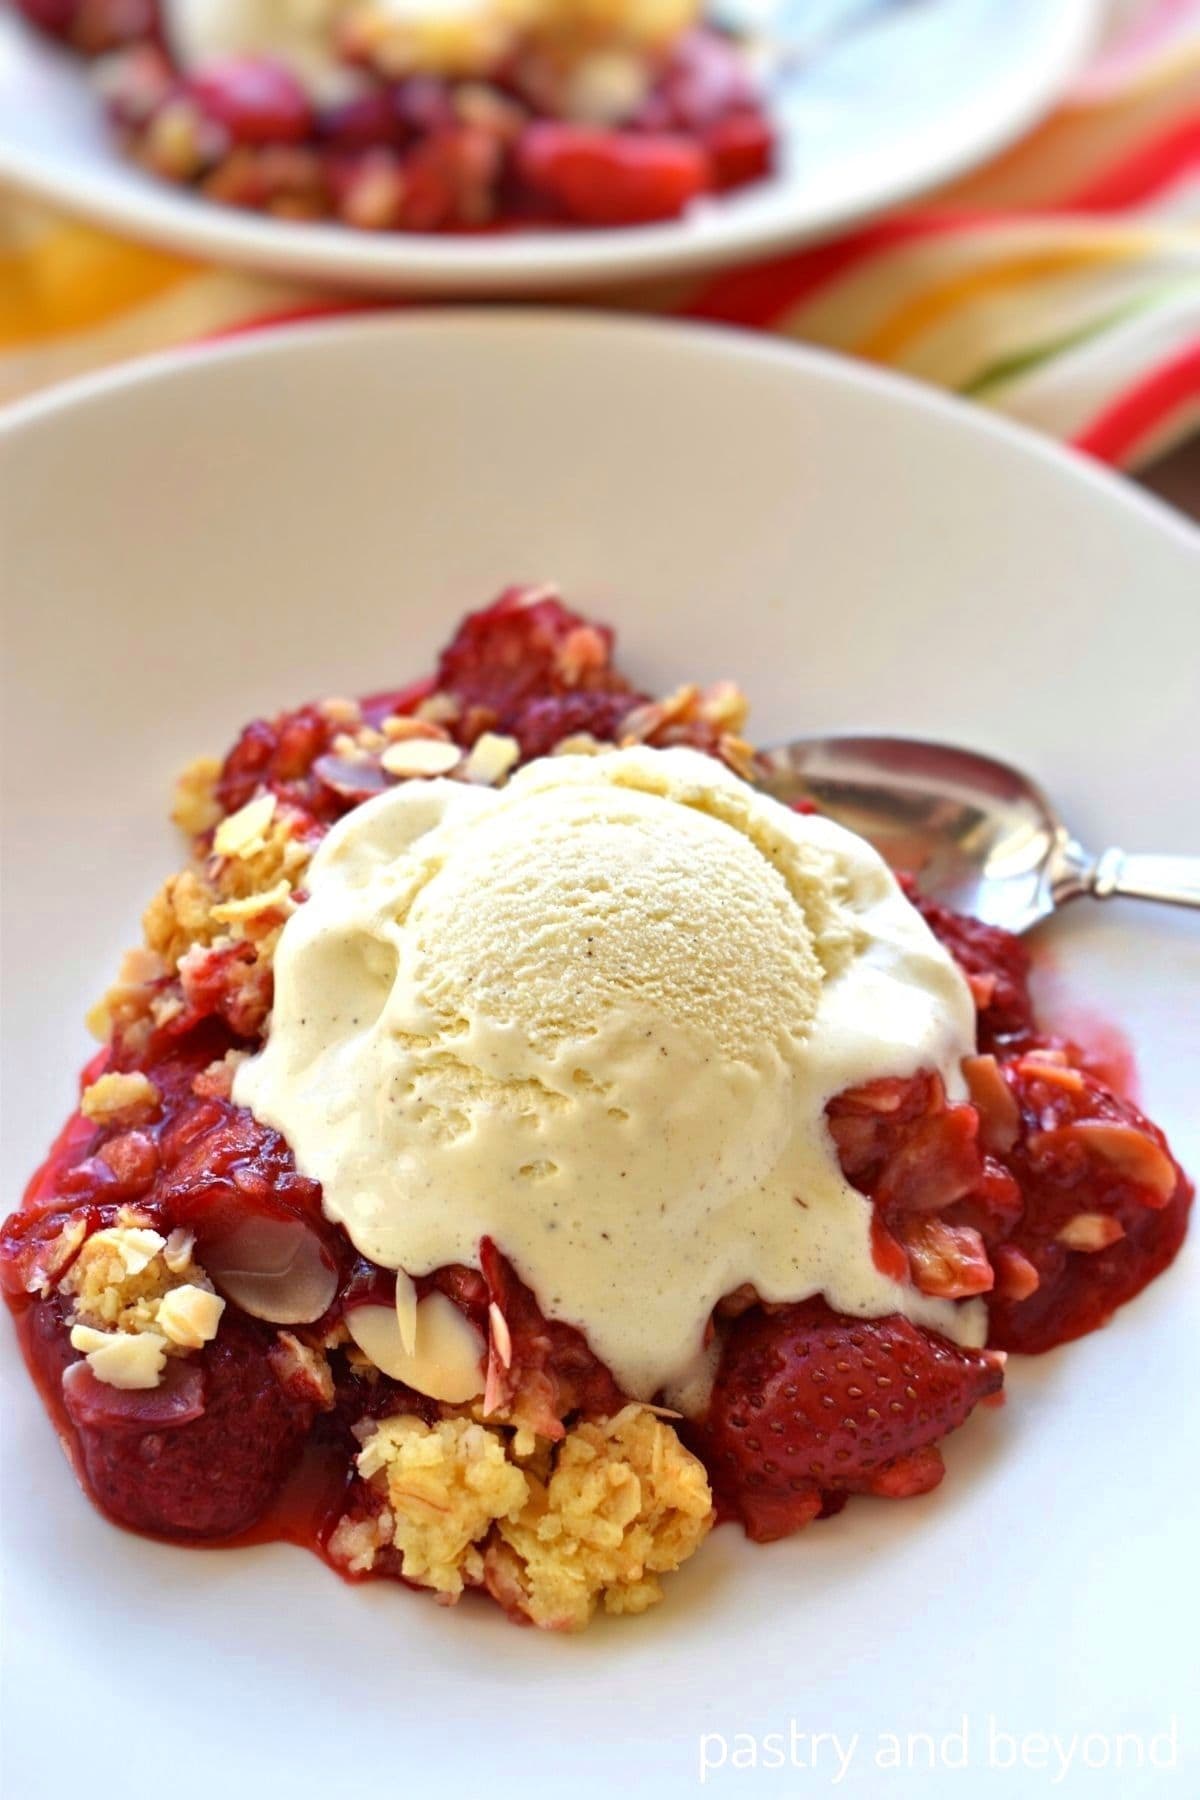 Strawberry crumble with vanilla bean ice cream on a plate.